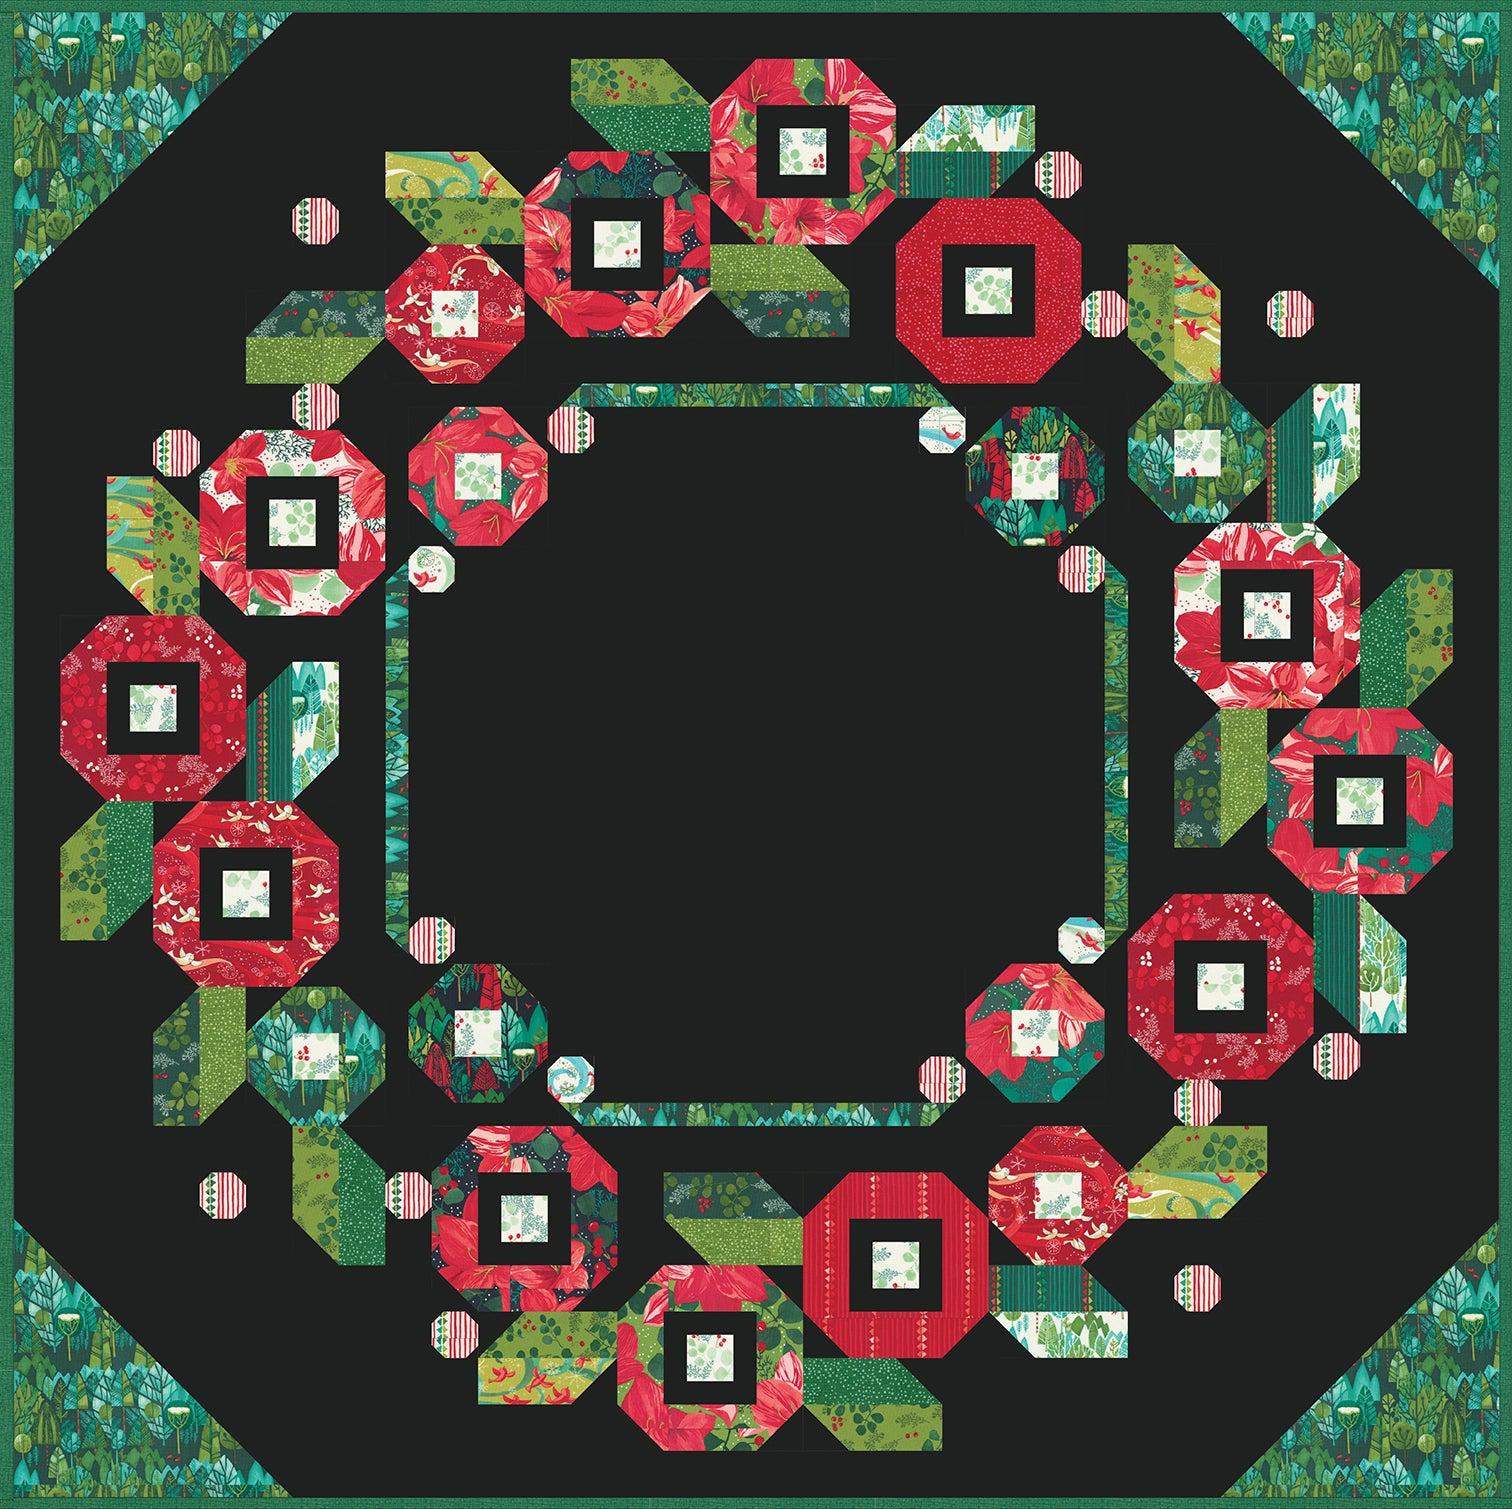 Winterly Black with Green Ring Around the Posies Quilt Kit